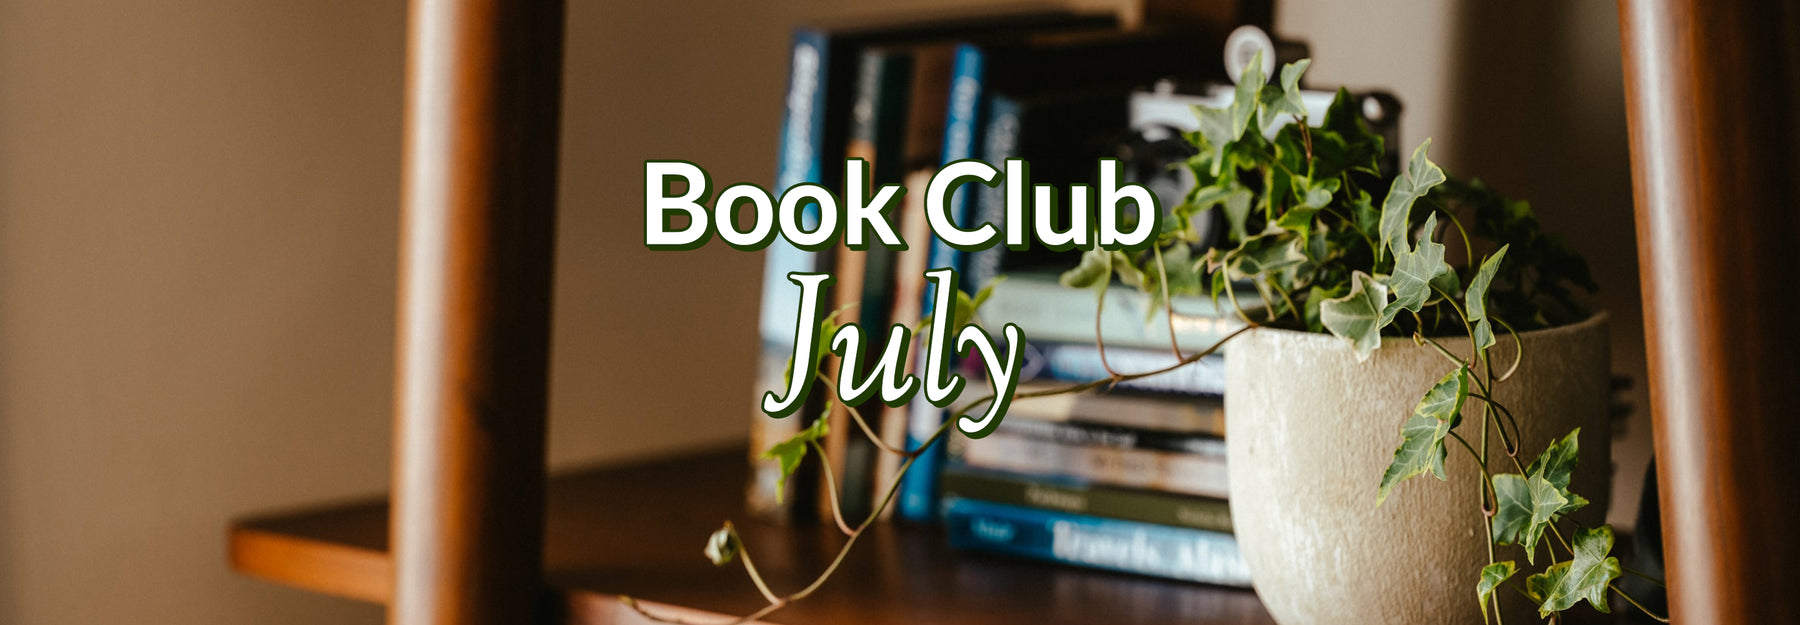 Book Club Recommendations for July